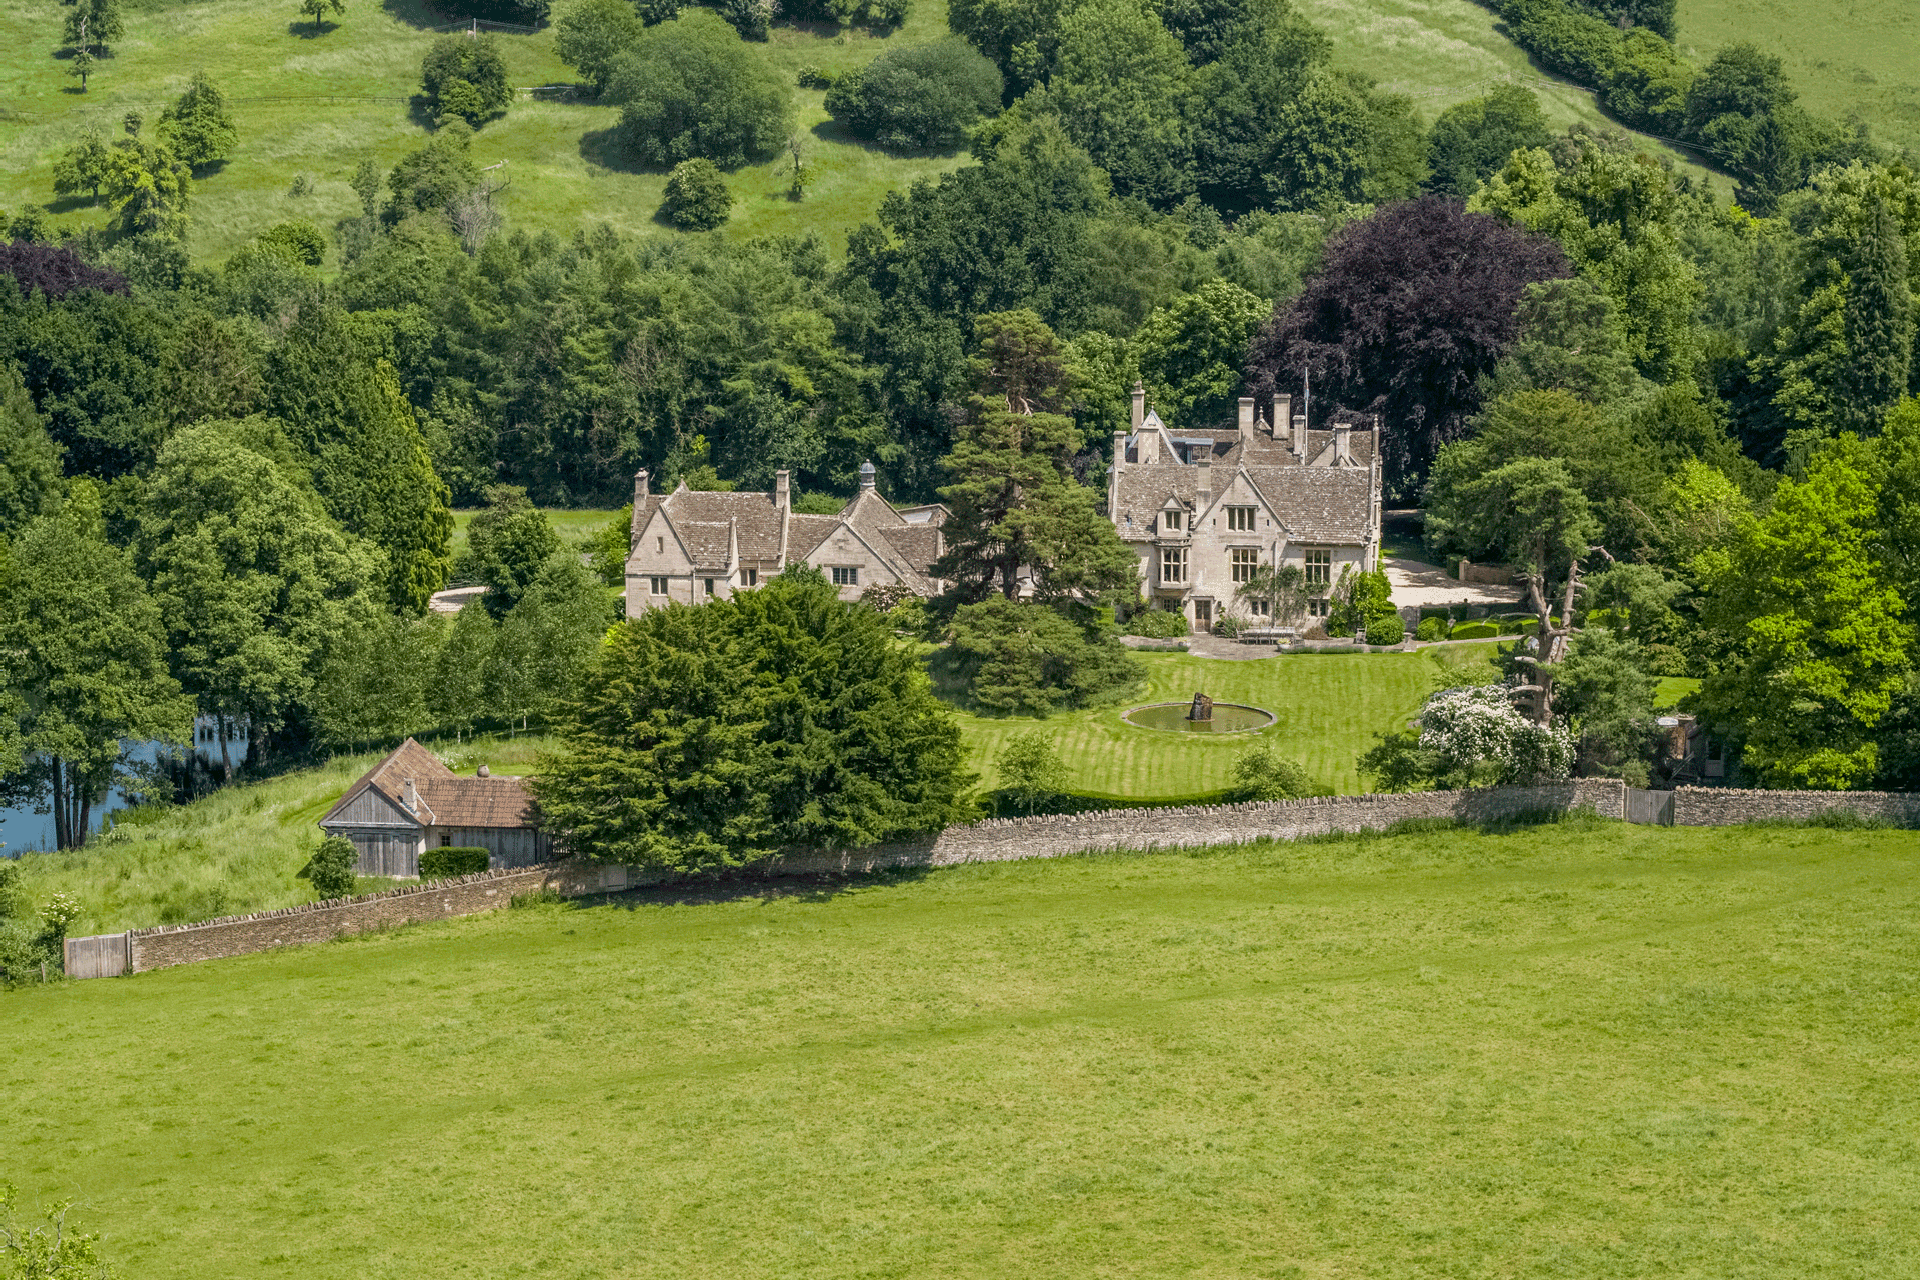 Aerial view of The Old Priory, a Cotswold manor house.